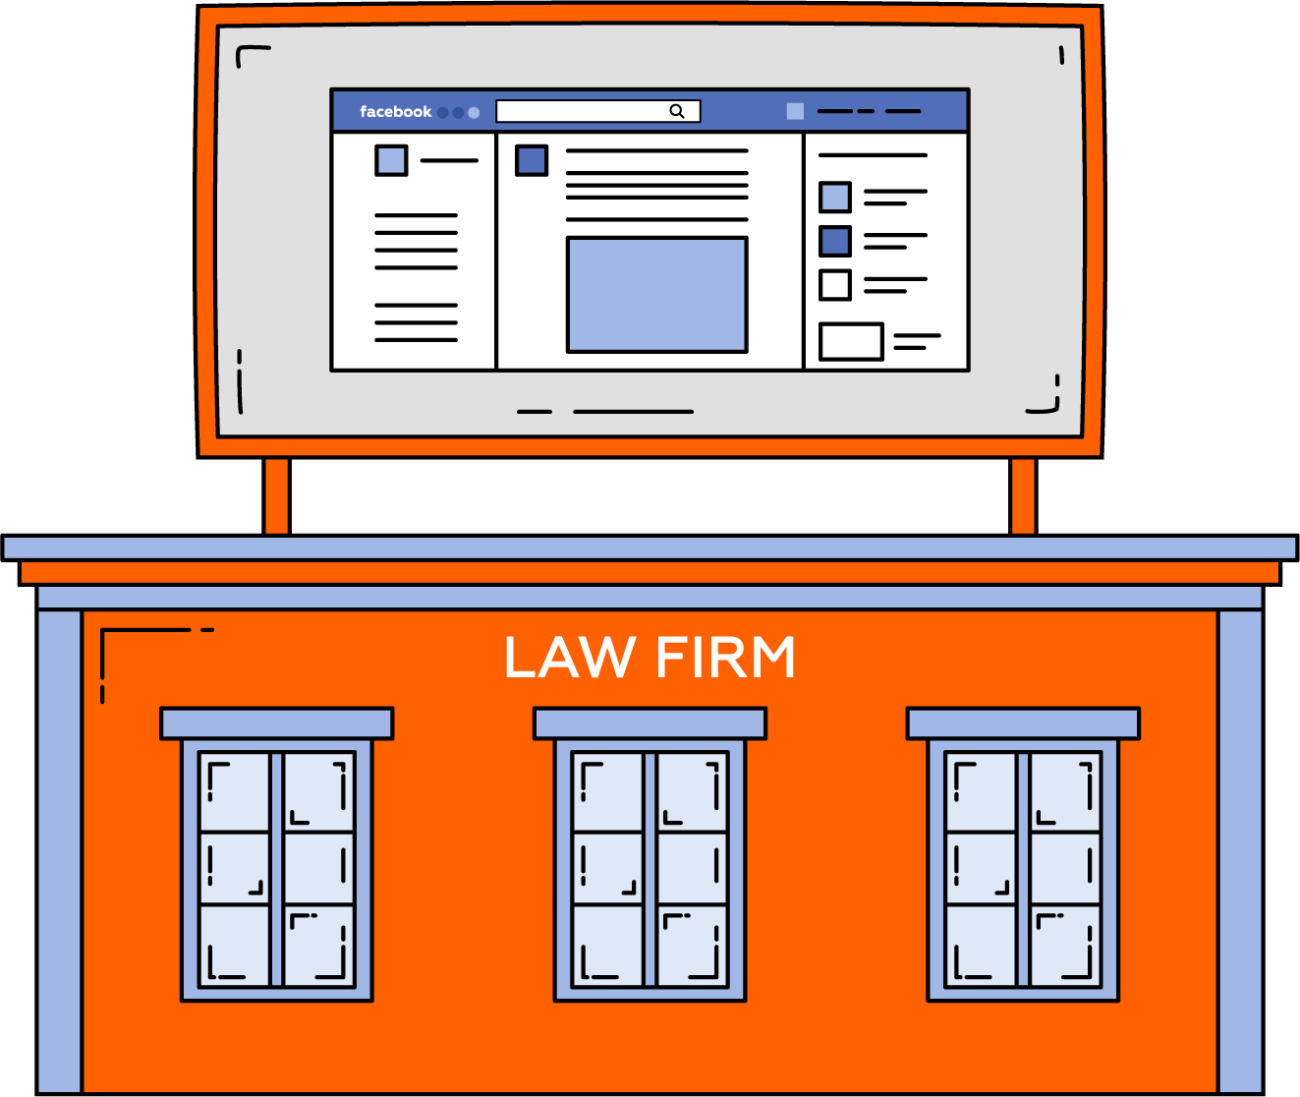 Law firm building illustration with Facebook billboard